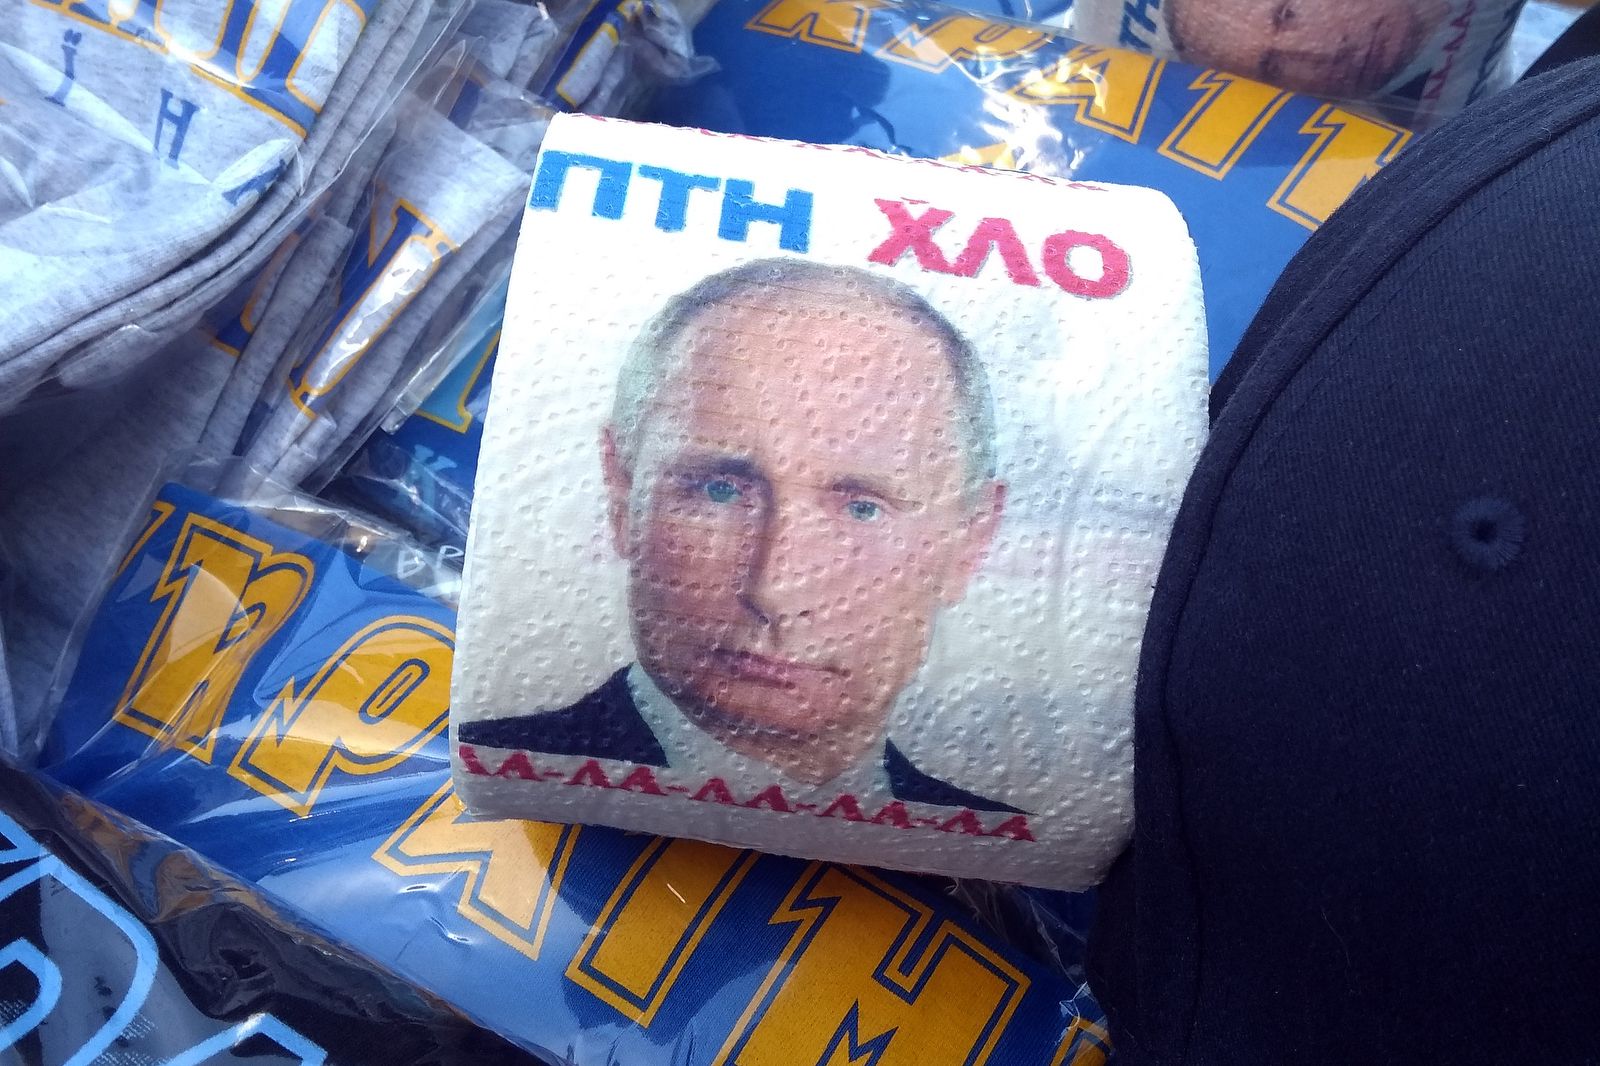 Putin toilet roll on sale in Kyiv. I bought some but decided against bringing it on this trip...